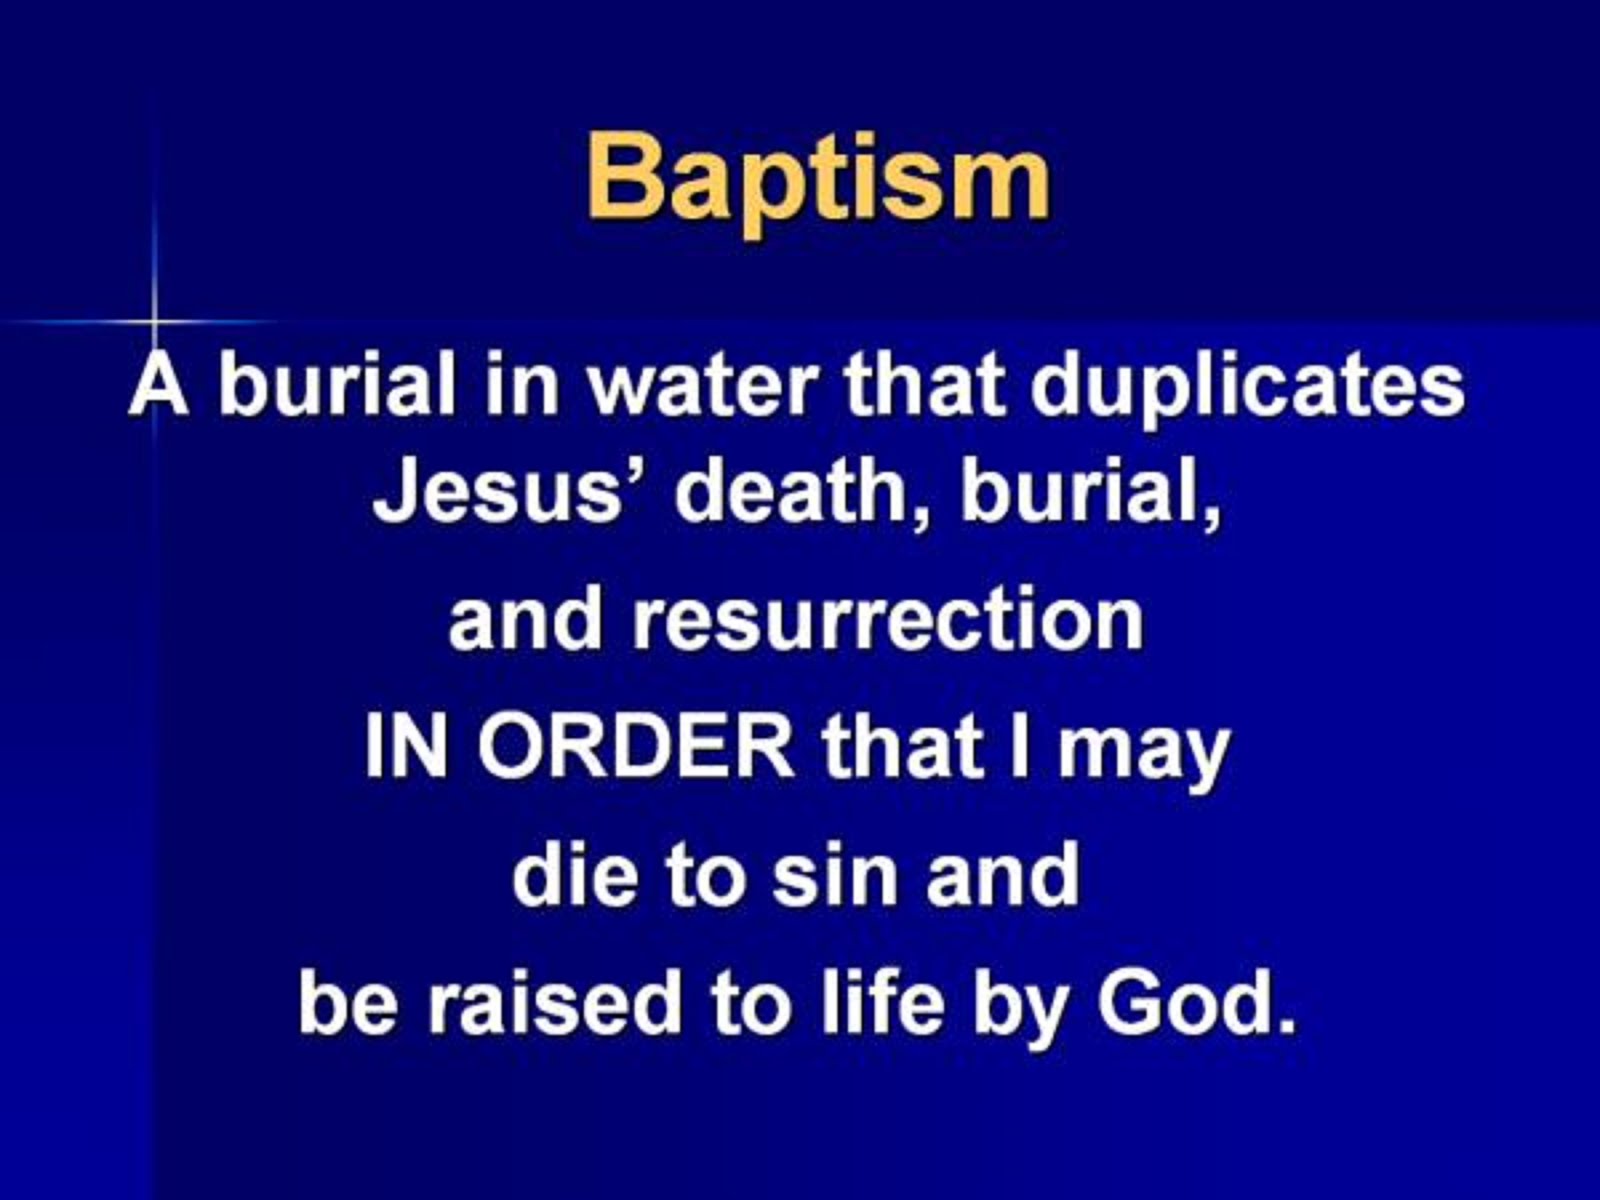 DO YOU KNOW THE REASON FOR BAPTISM???